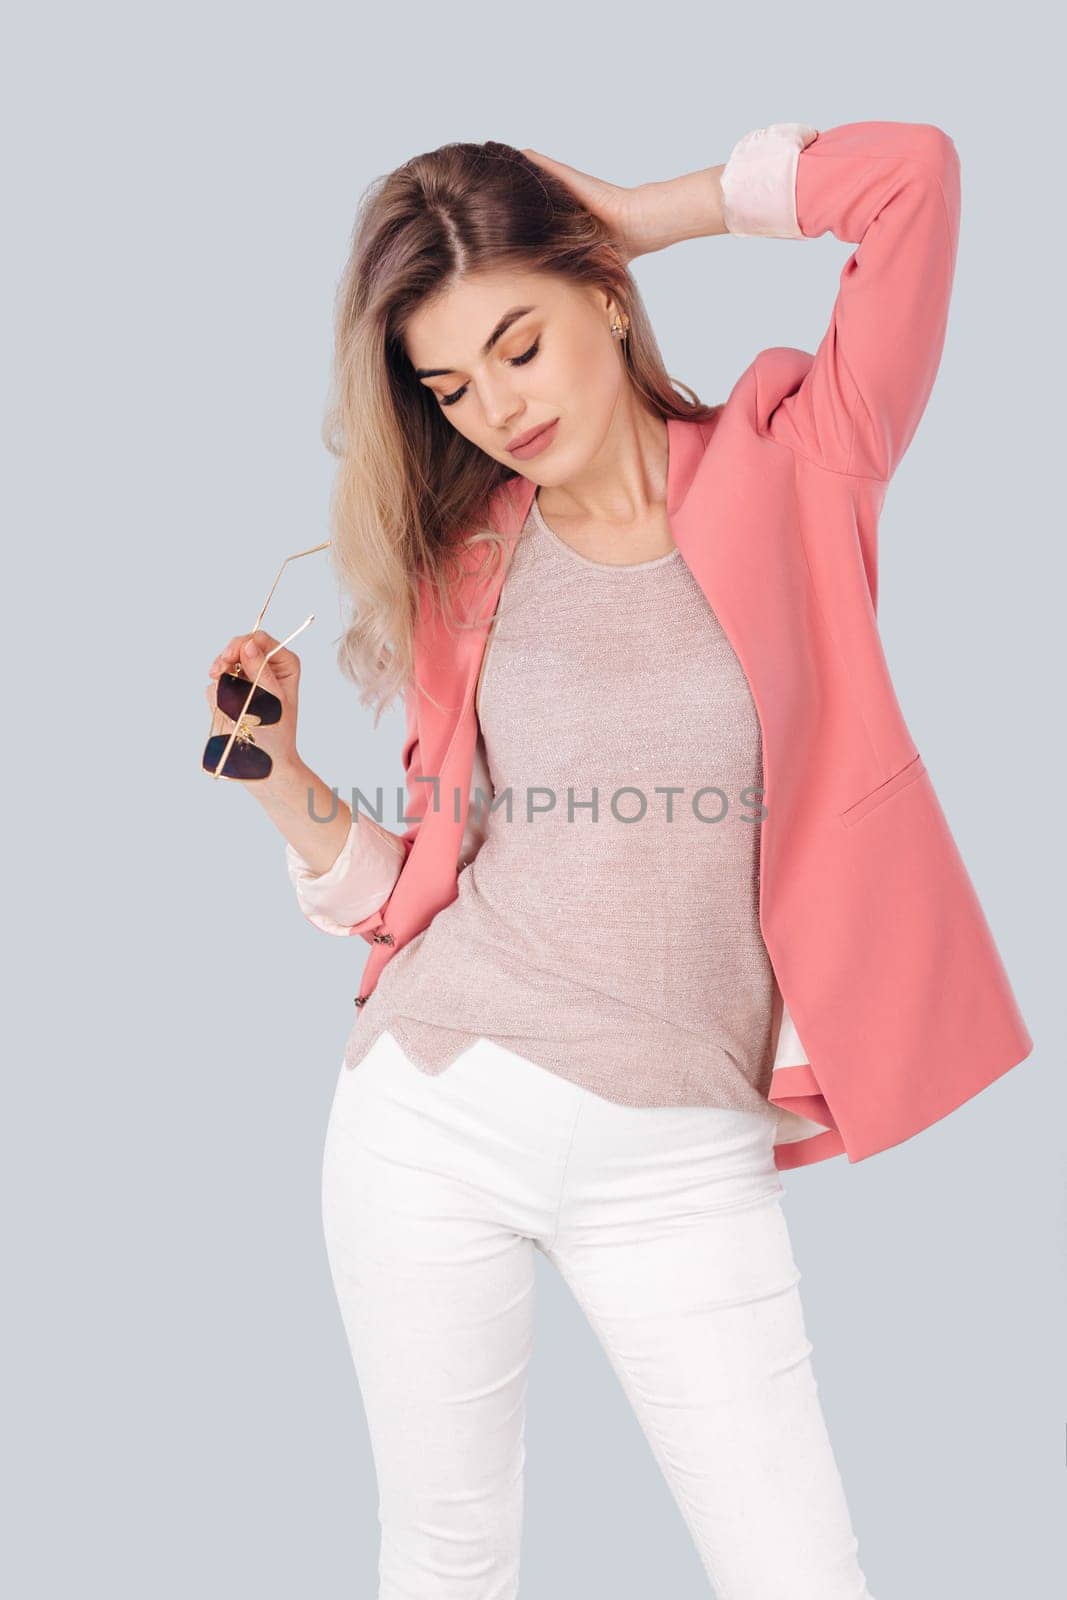 Fashion portrait of attractive elegant blonde woman in pastel casual pink jacket posing in studio. woman dressed in trendy spring outfit